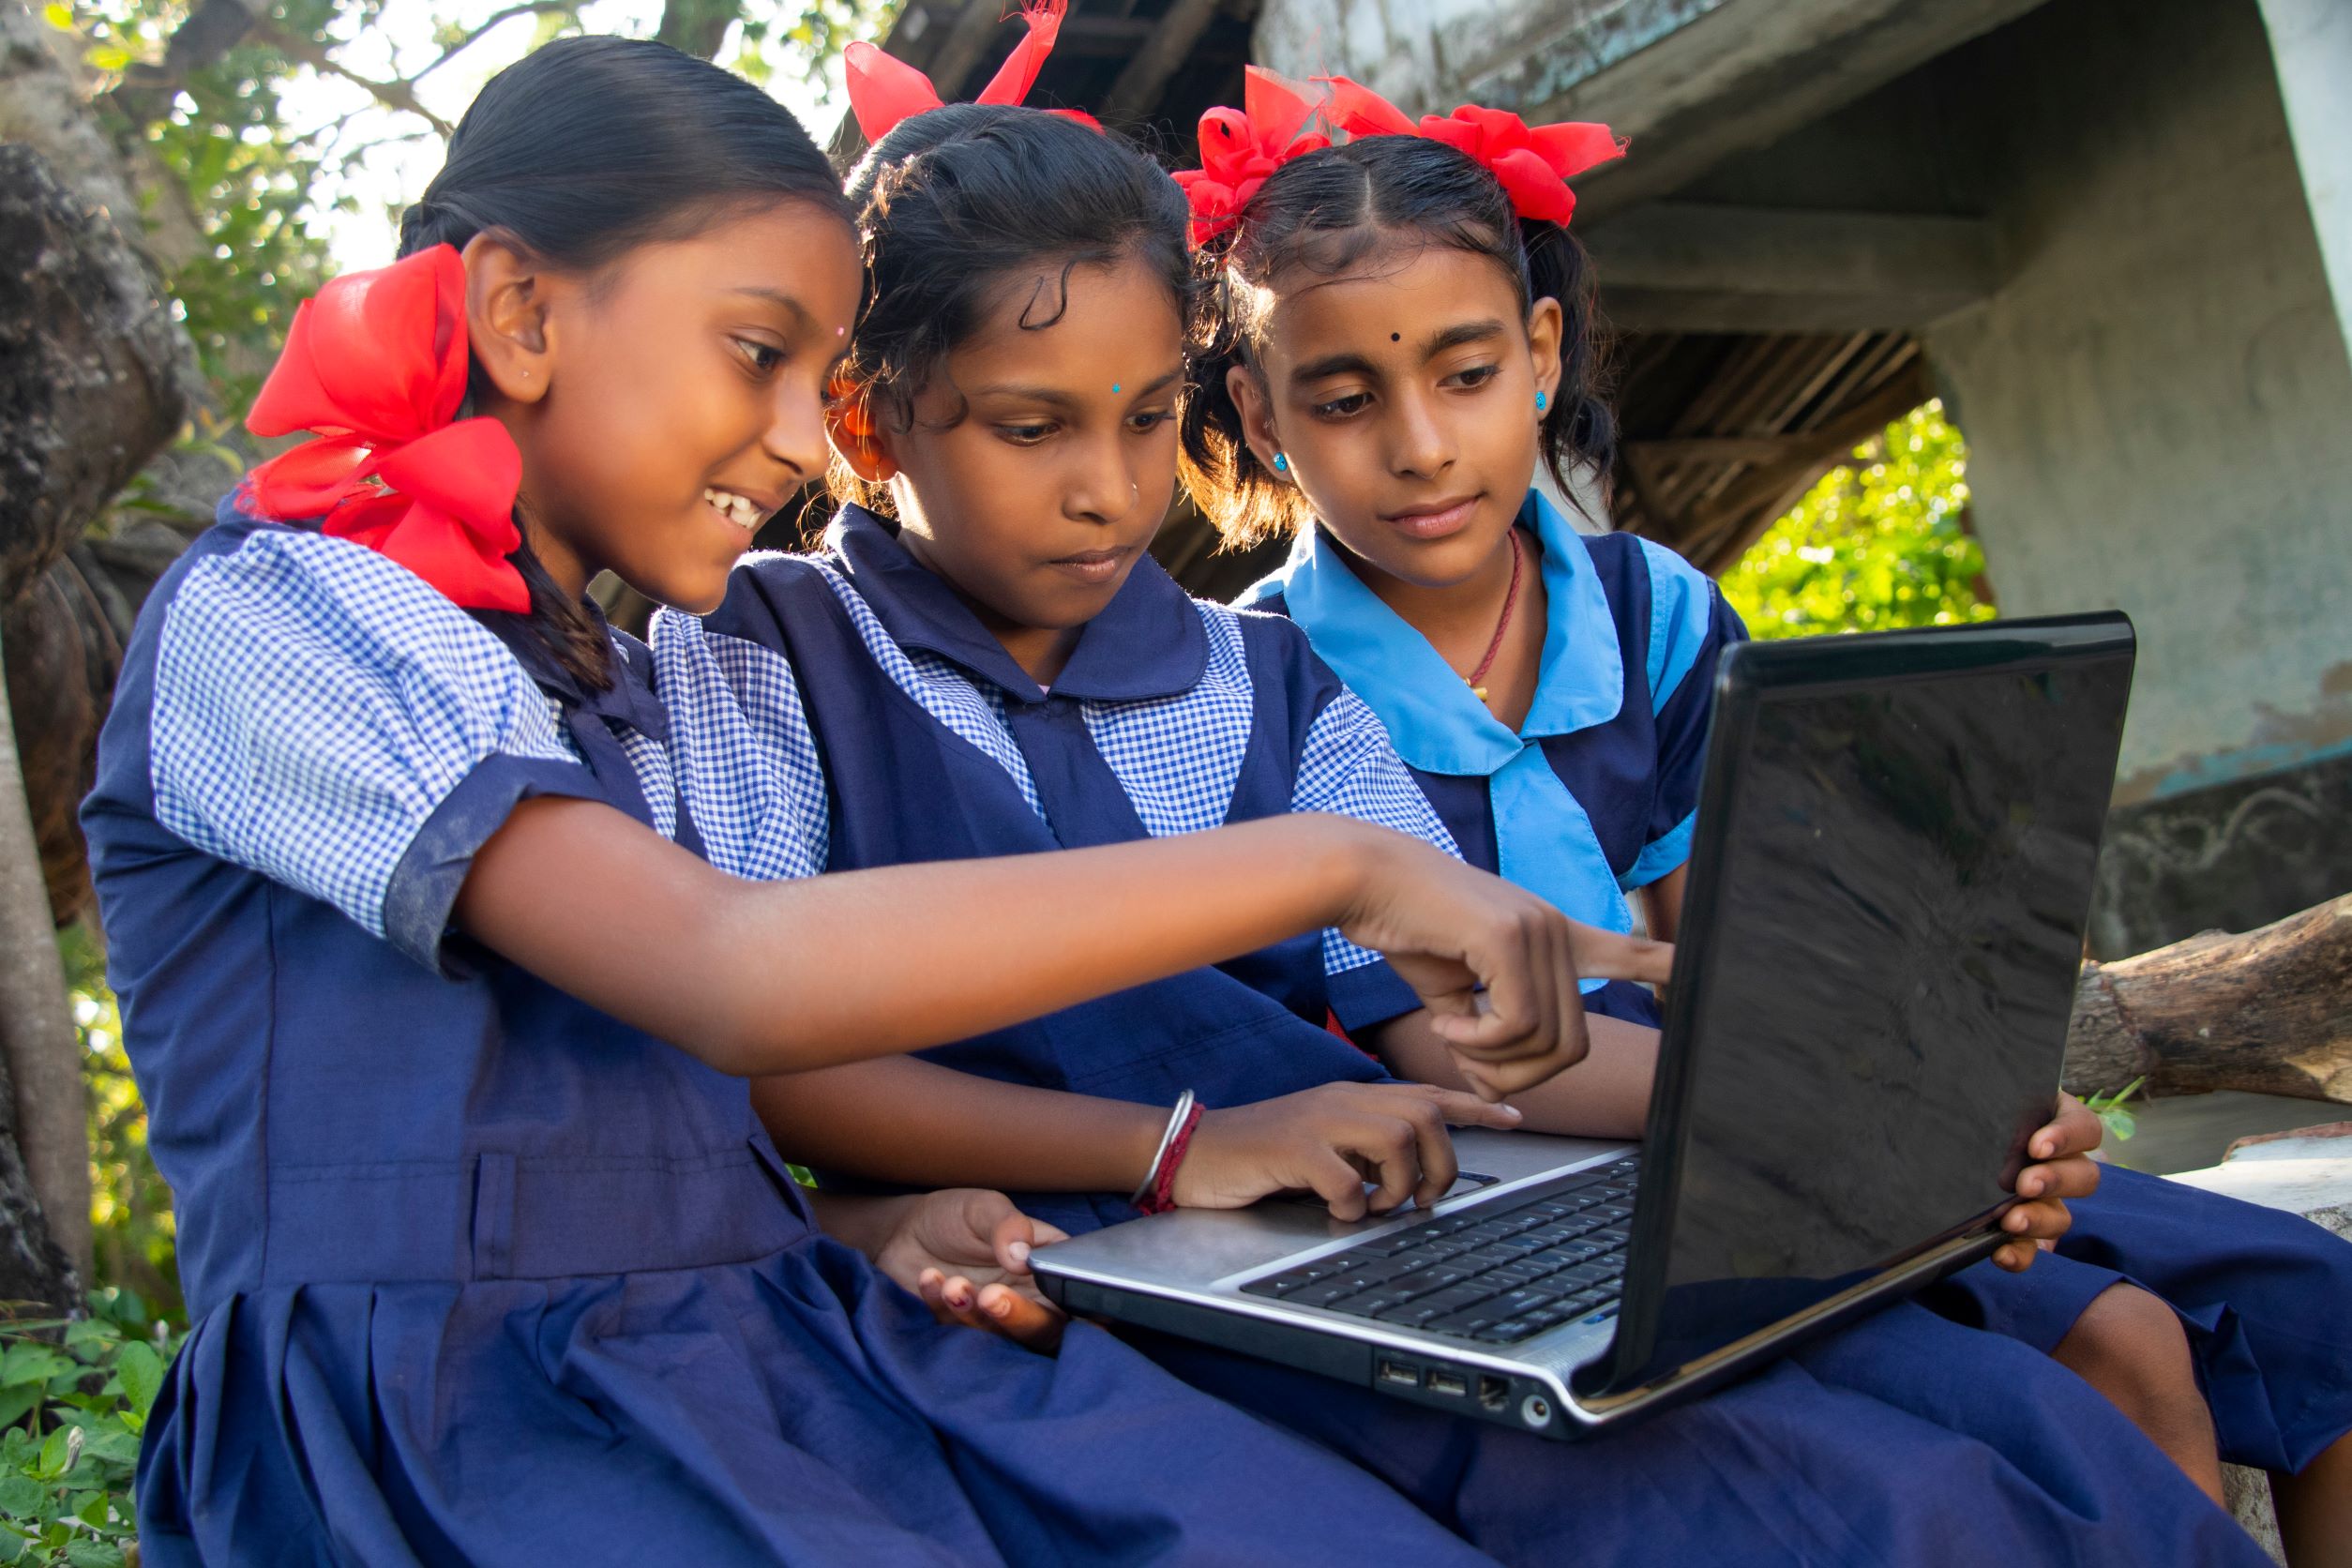 how has education technology impacted student learning in india during covid -19?